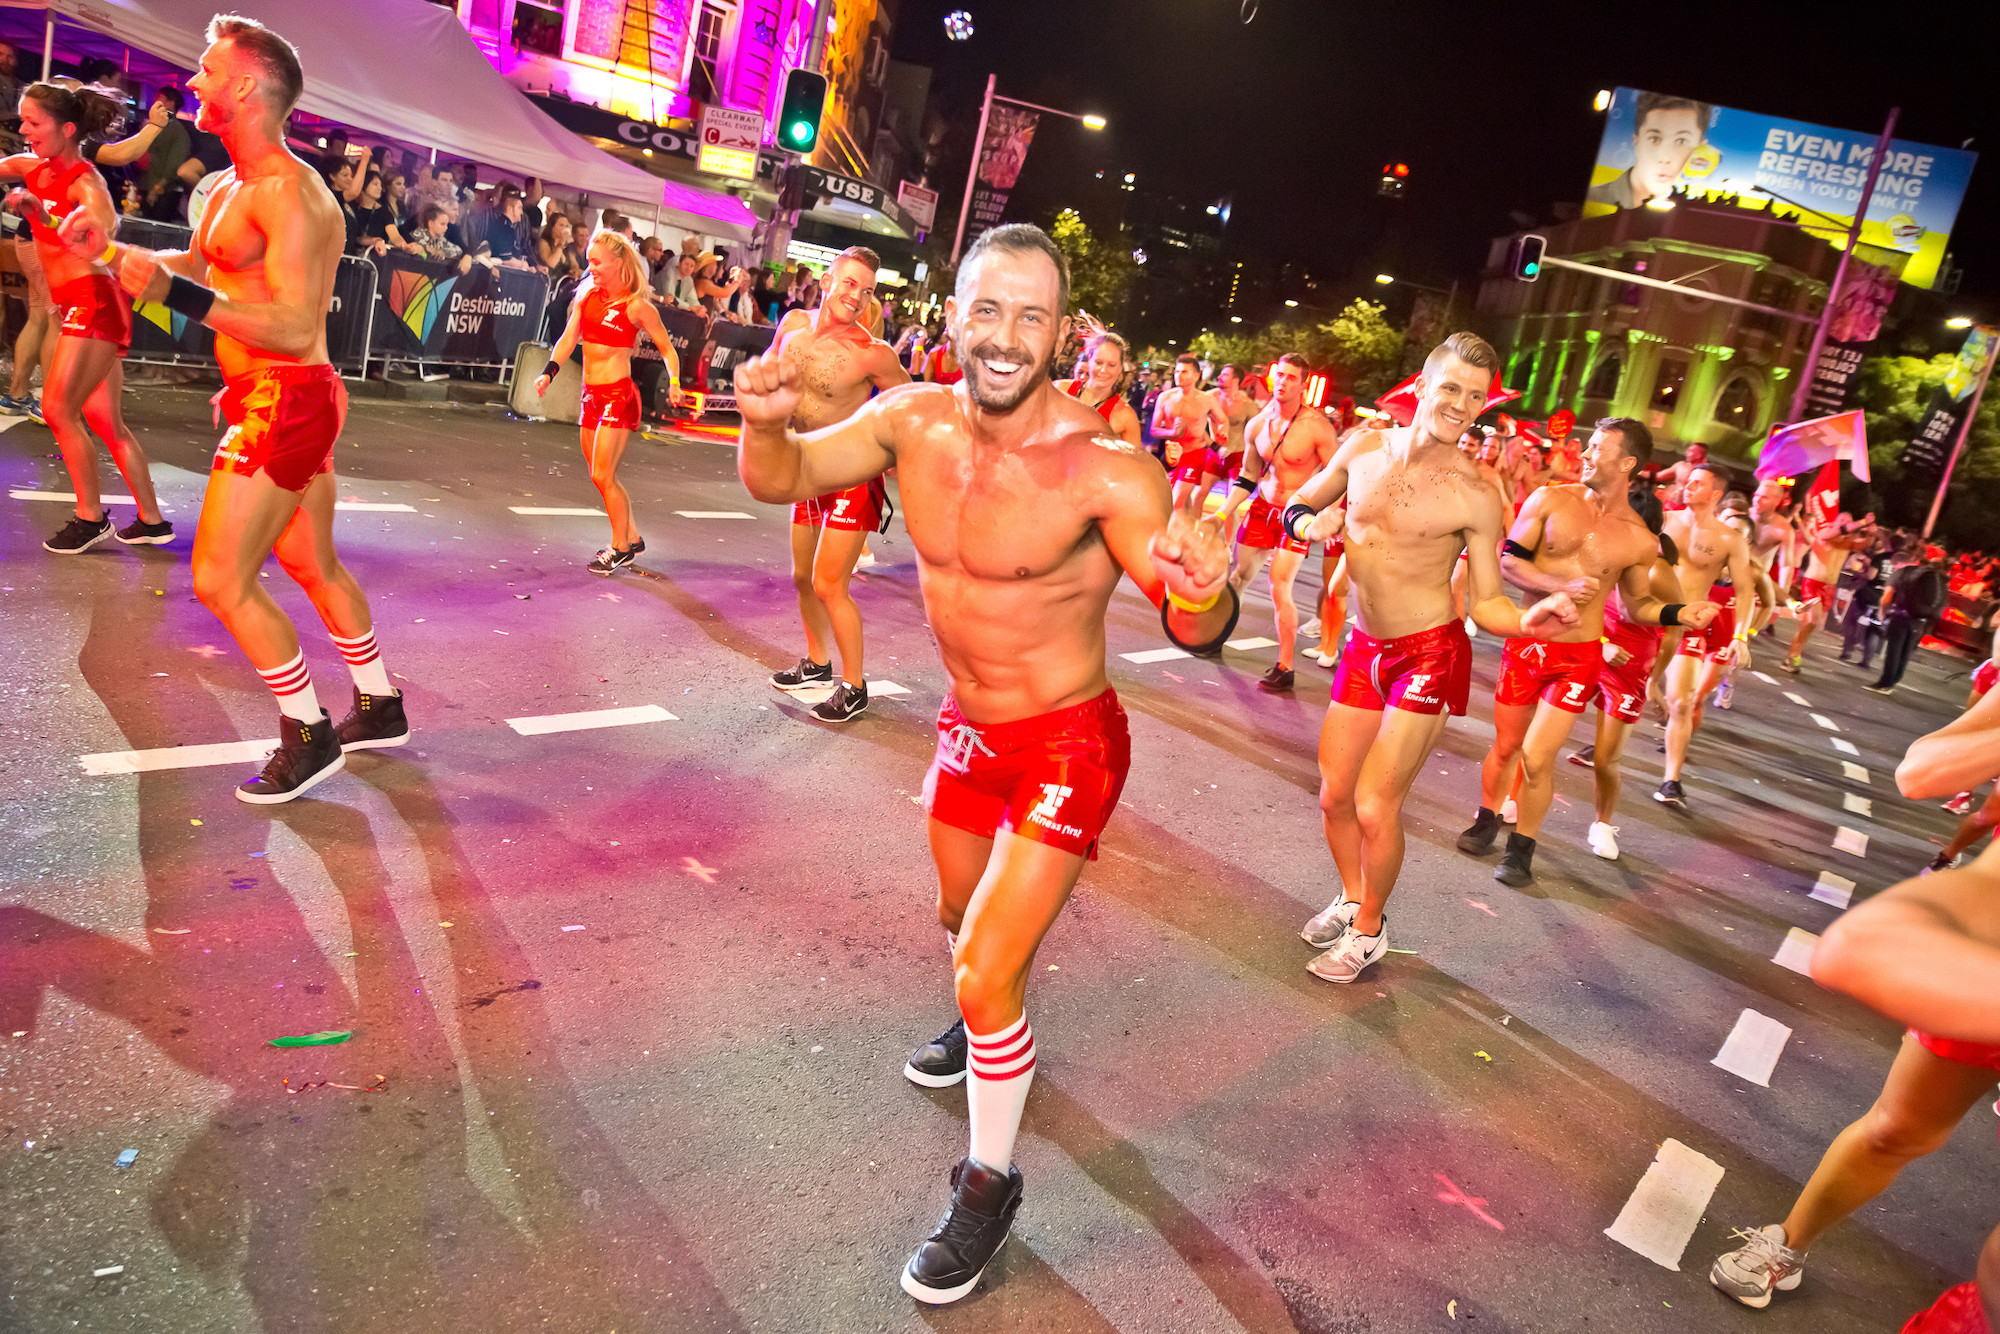 Sydney Gay and Lesbian Mardi Gras Parade exclusive access